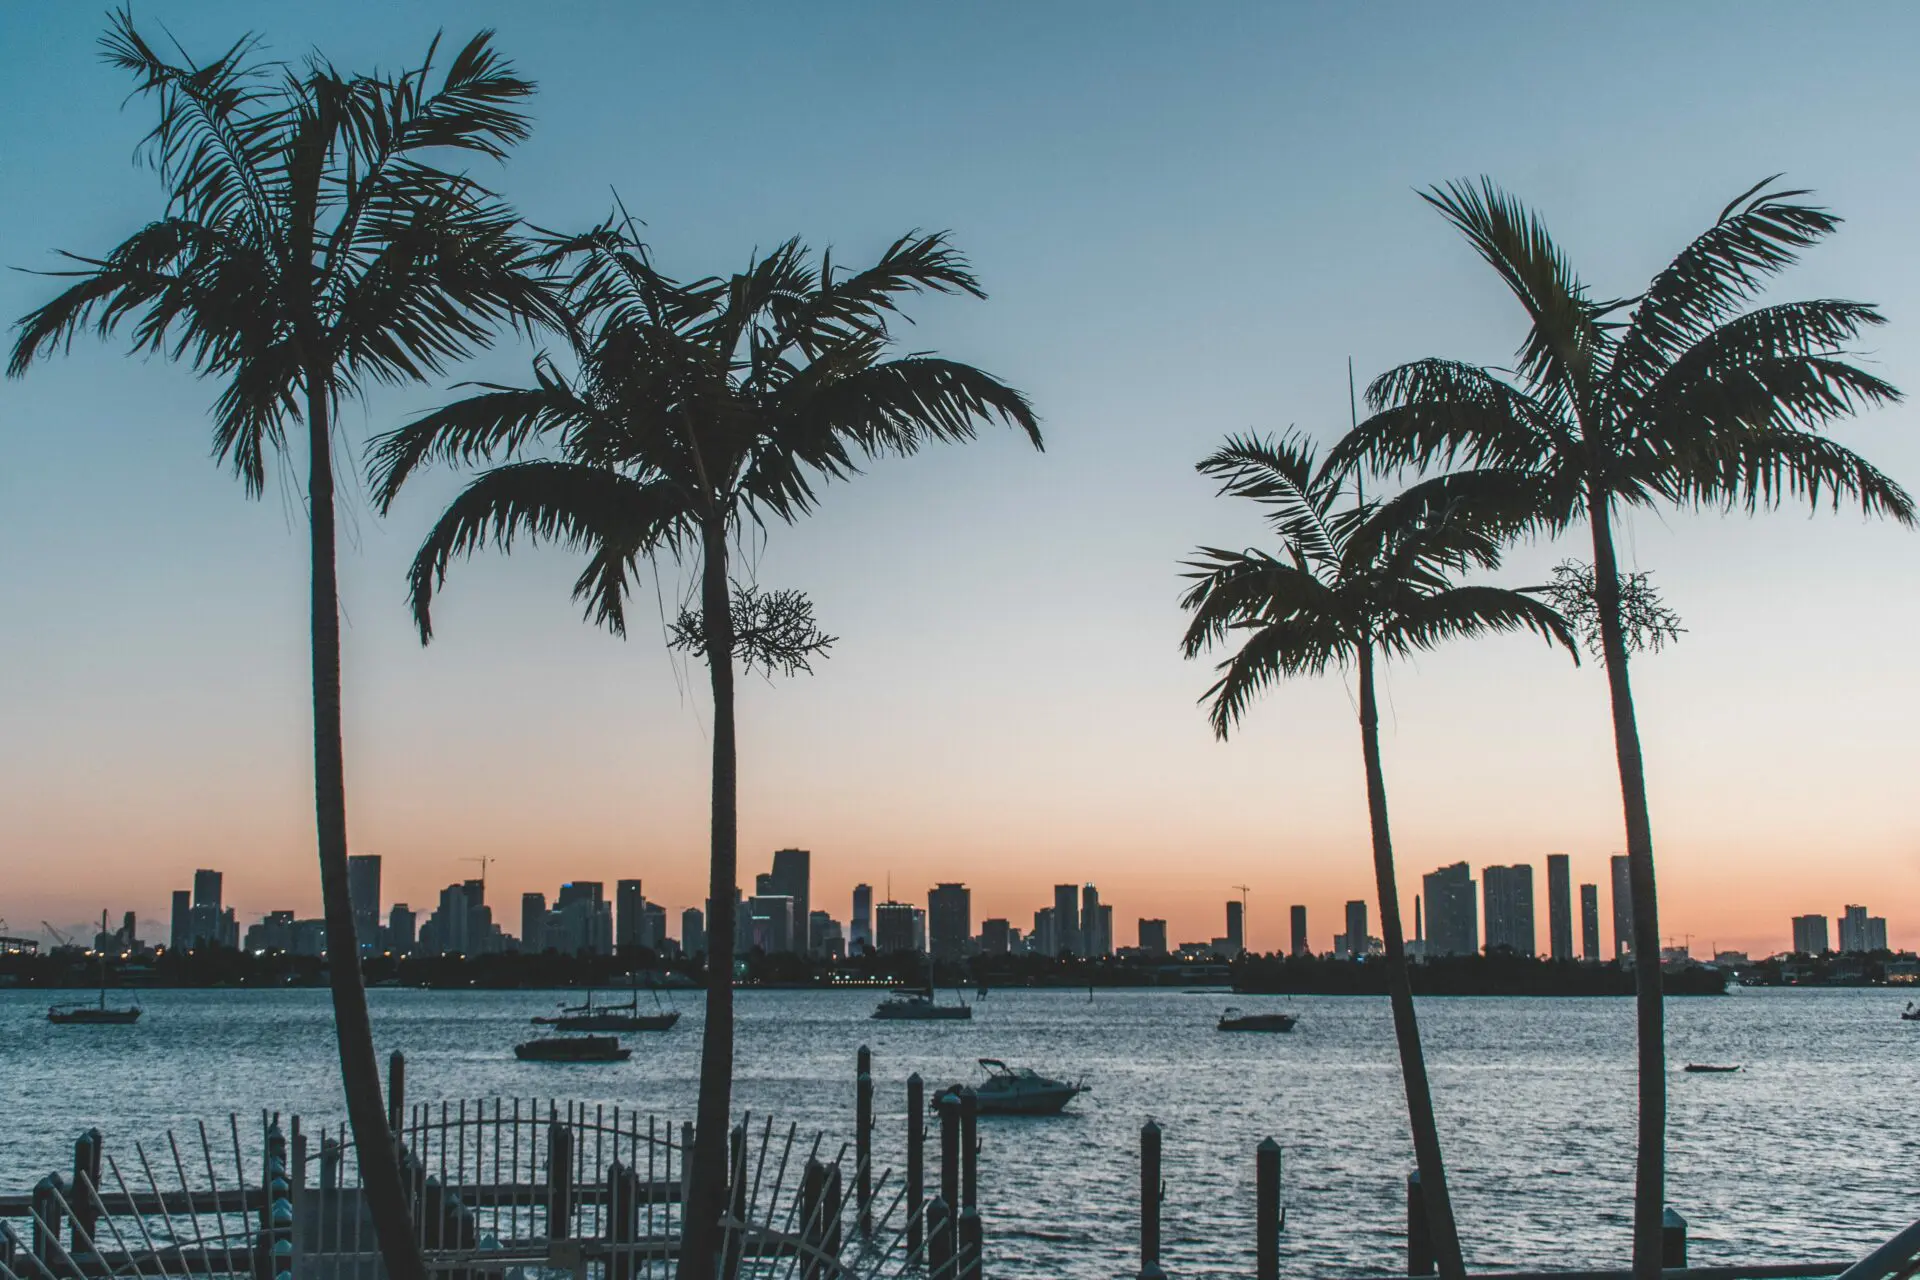 Image of the Miami skyline at sunset with palm trees and the sea